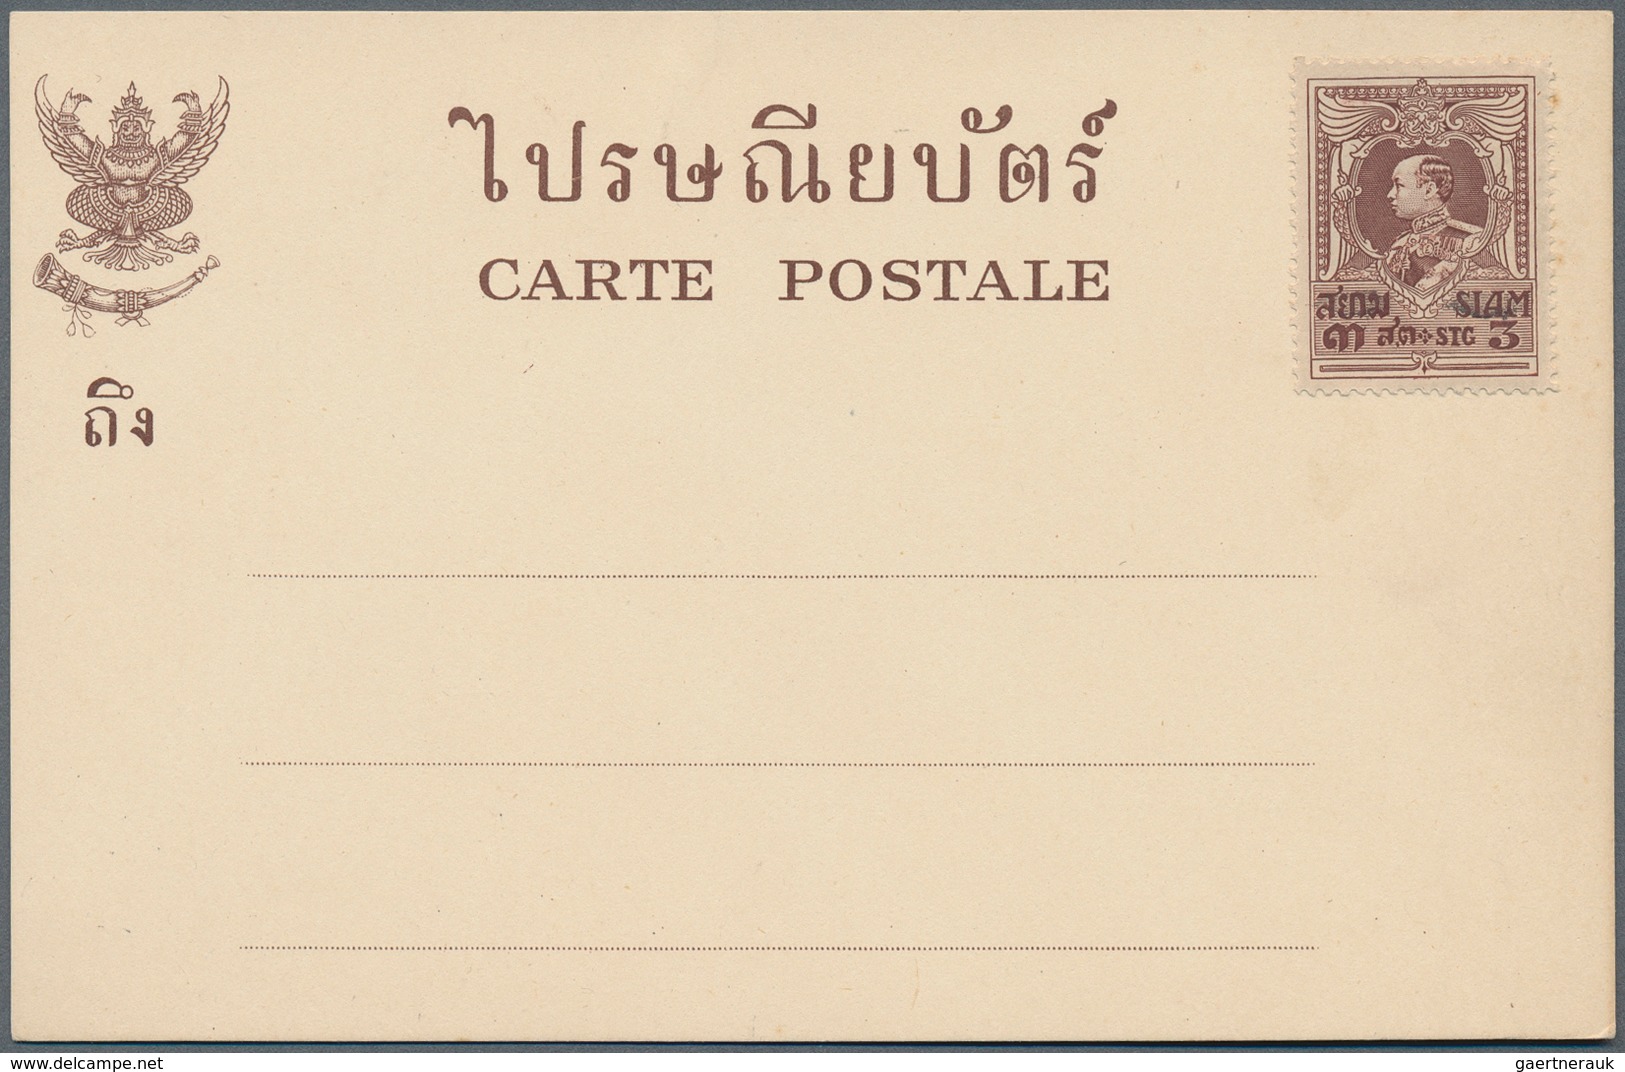 Thailand: 1906/1960, Covers/used Stationery (26) Inc. Two With Private Printing On Reverse. - Thailand